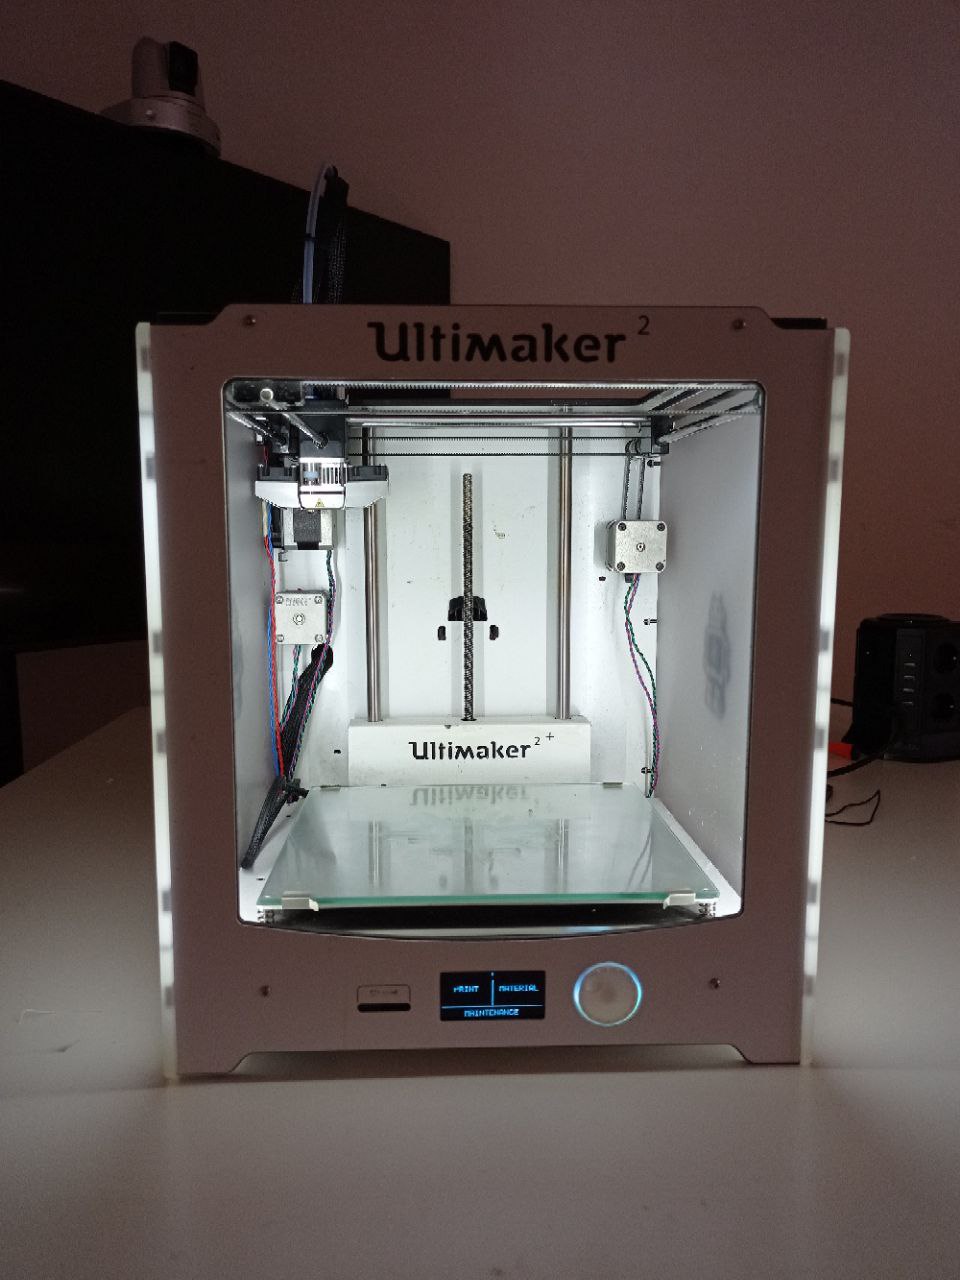 Our Ultimaker 2+